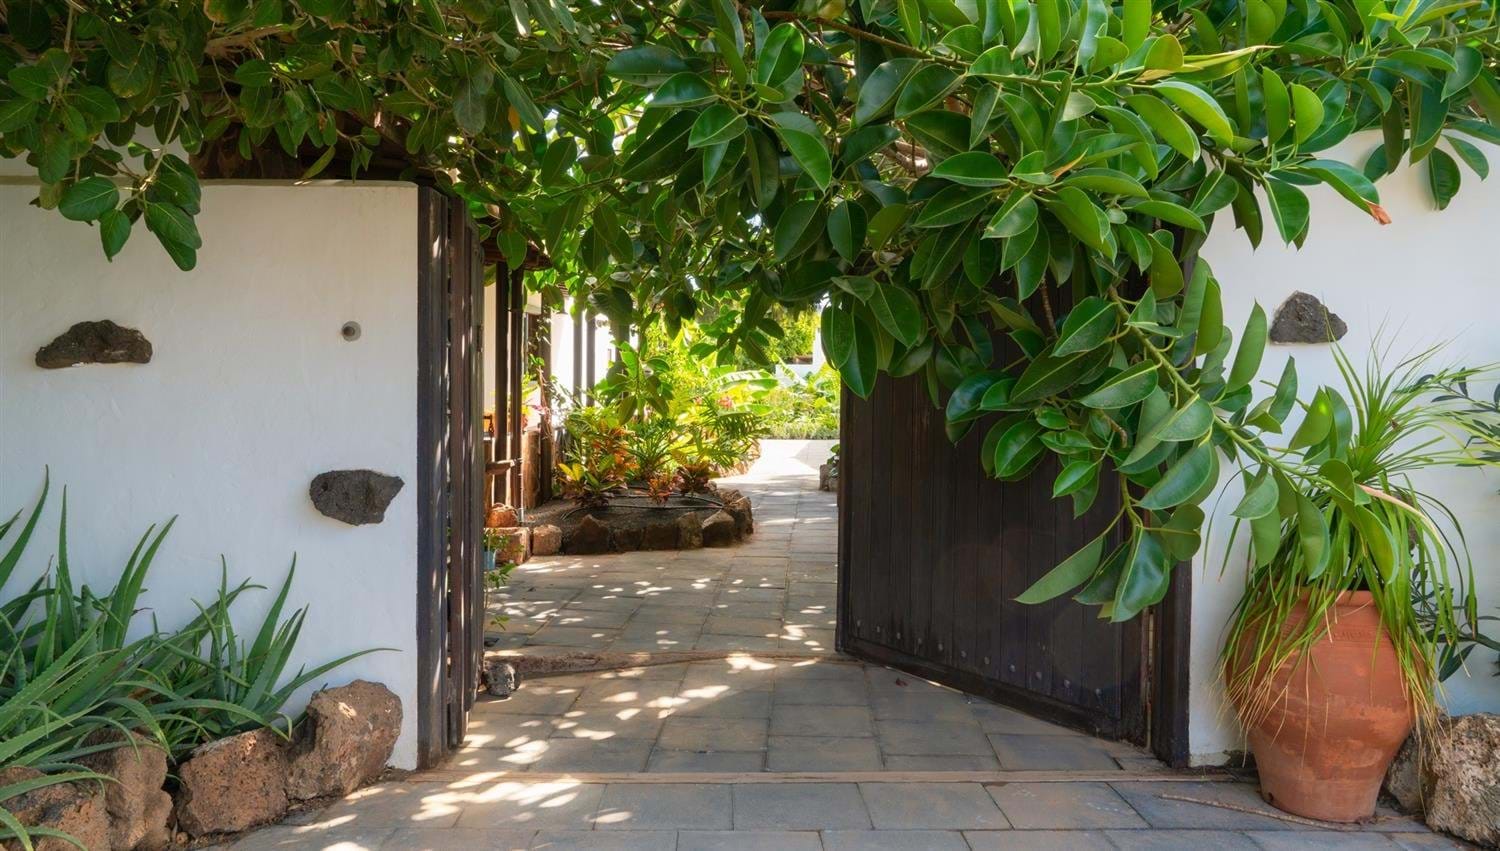 Large old wooden gate opening into The Secret Garden Villa at Finca Botanico in Lanzarote